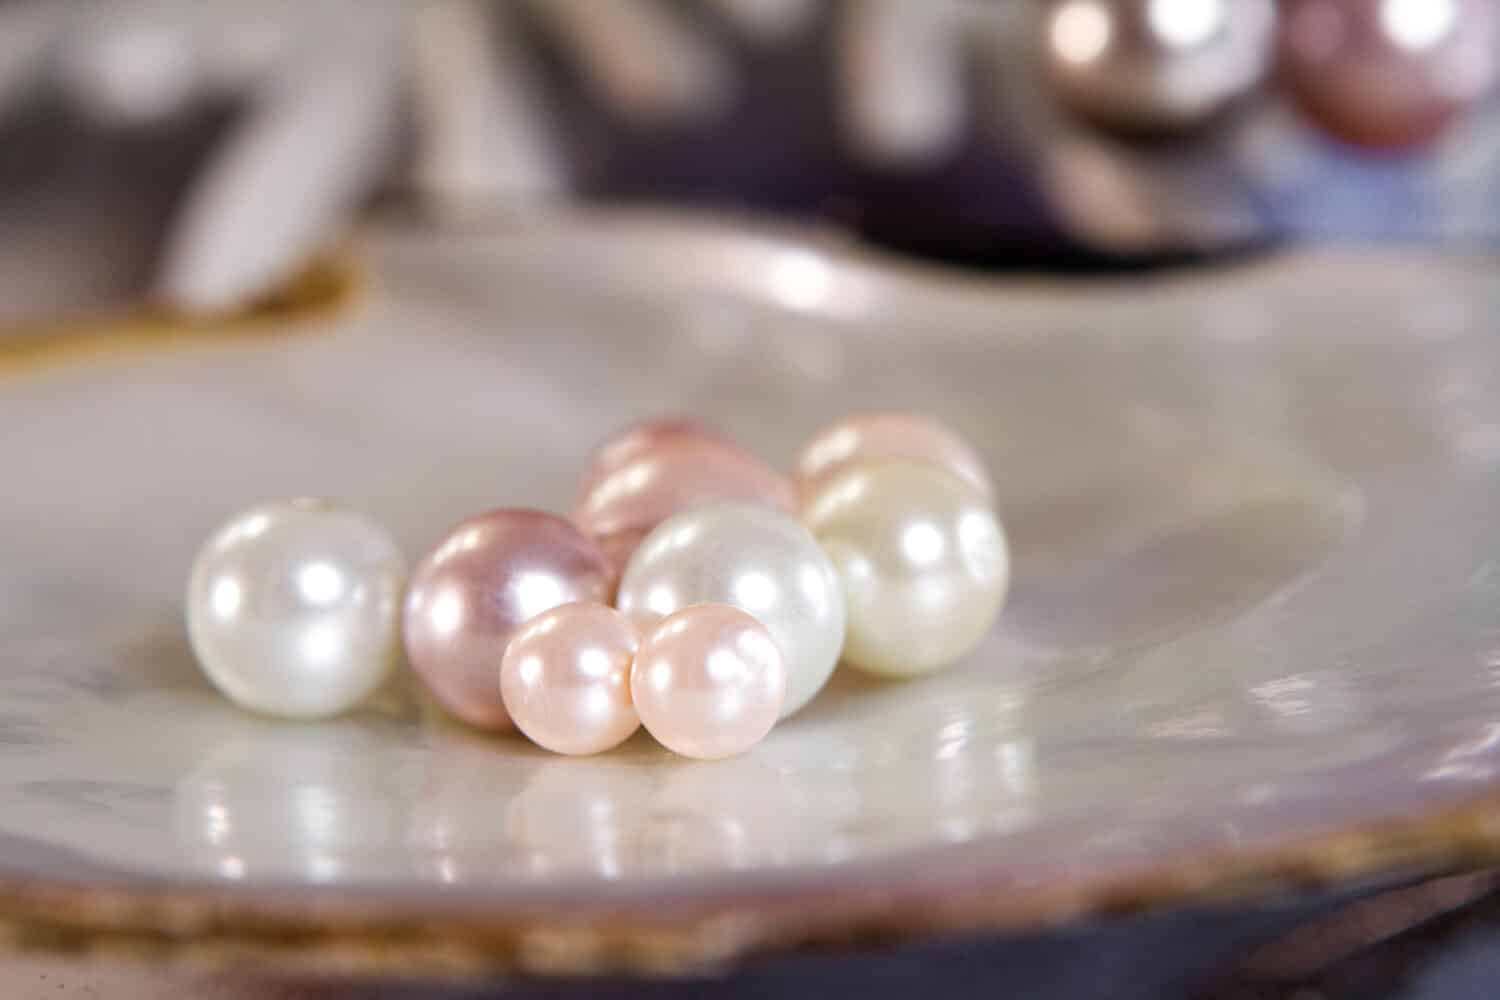 Different Pearl Types & Colors, The Four Major Types of Cultured Pearls